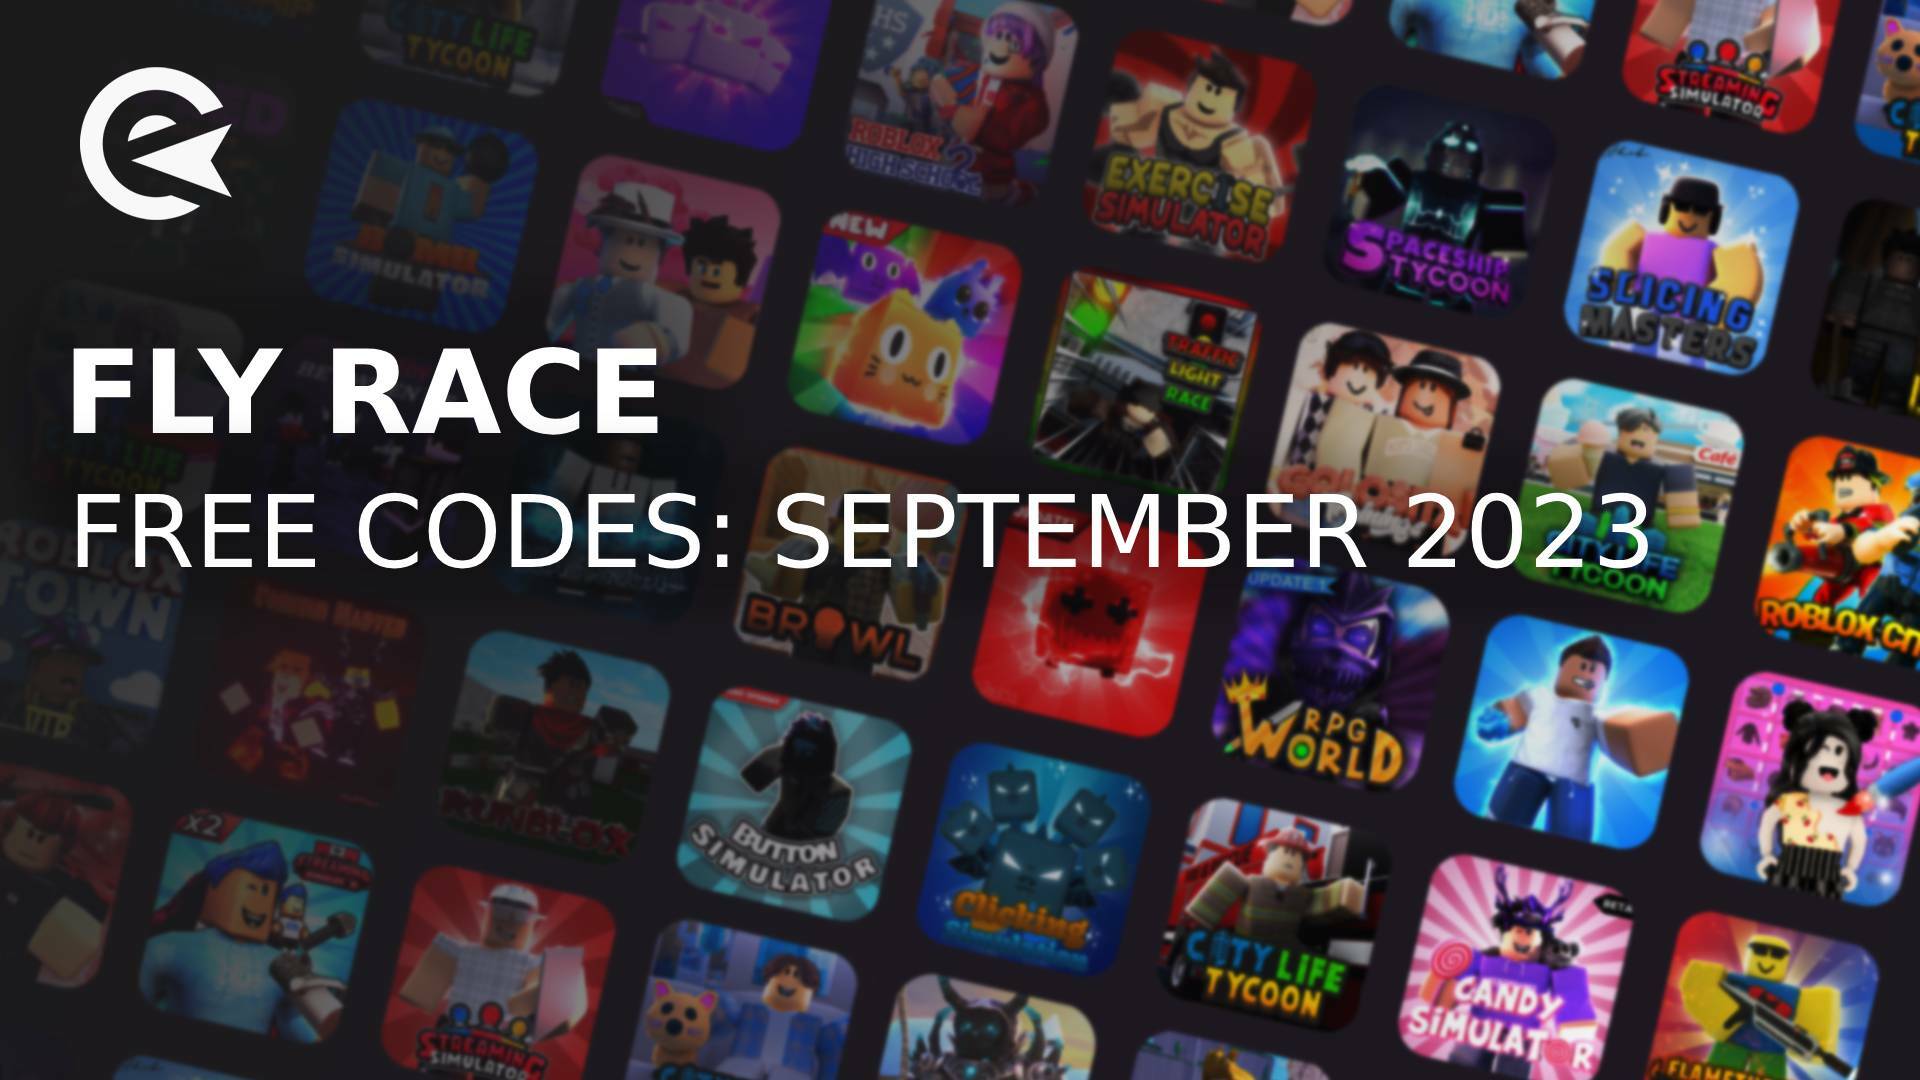 All Anime Fly Race Codes For September 2023 | How To Redeem?